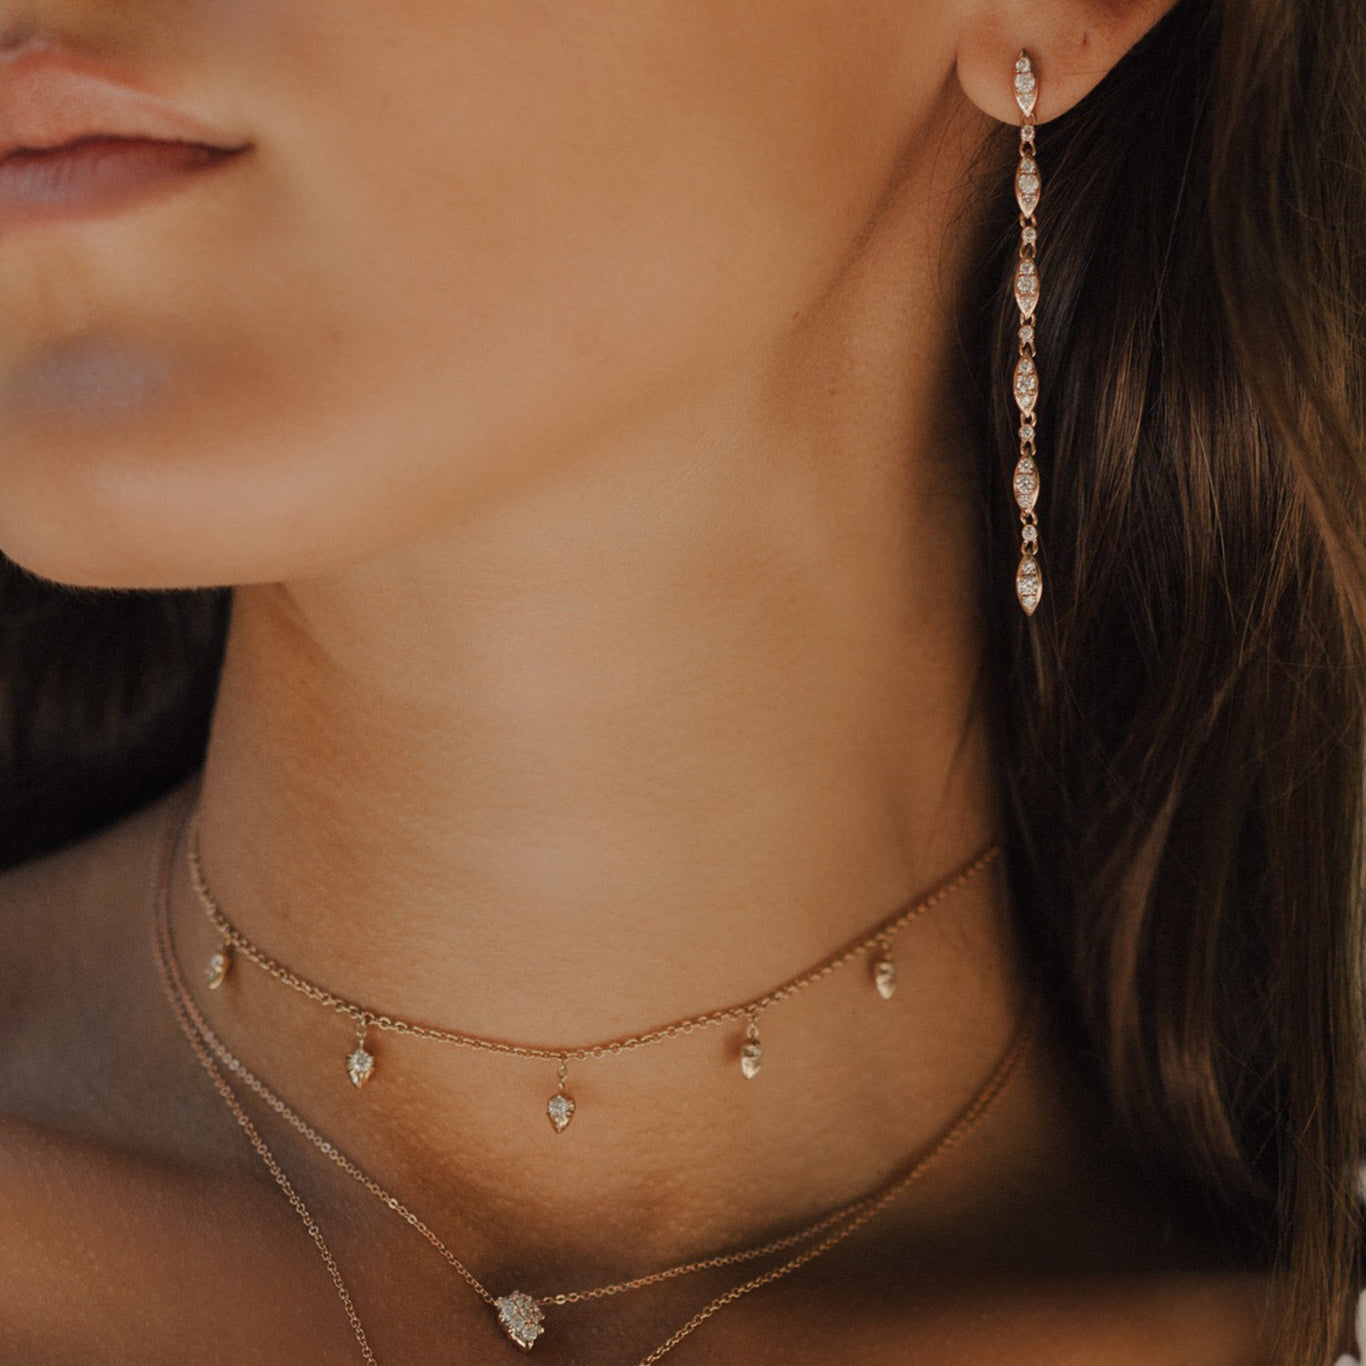 The Cascade Earrings shown paired with the Lily Choker and Venus Choker Chain.